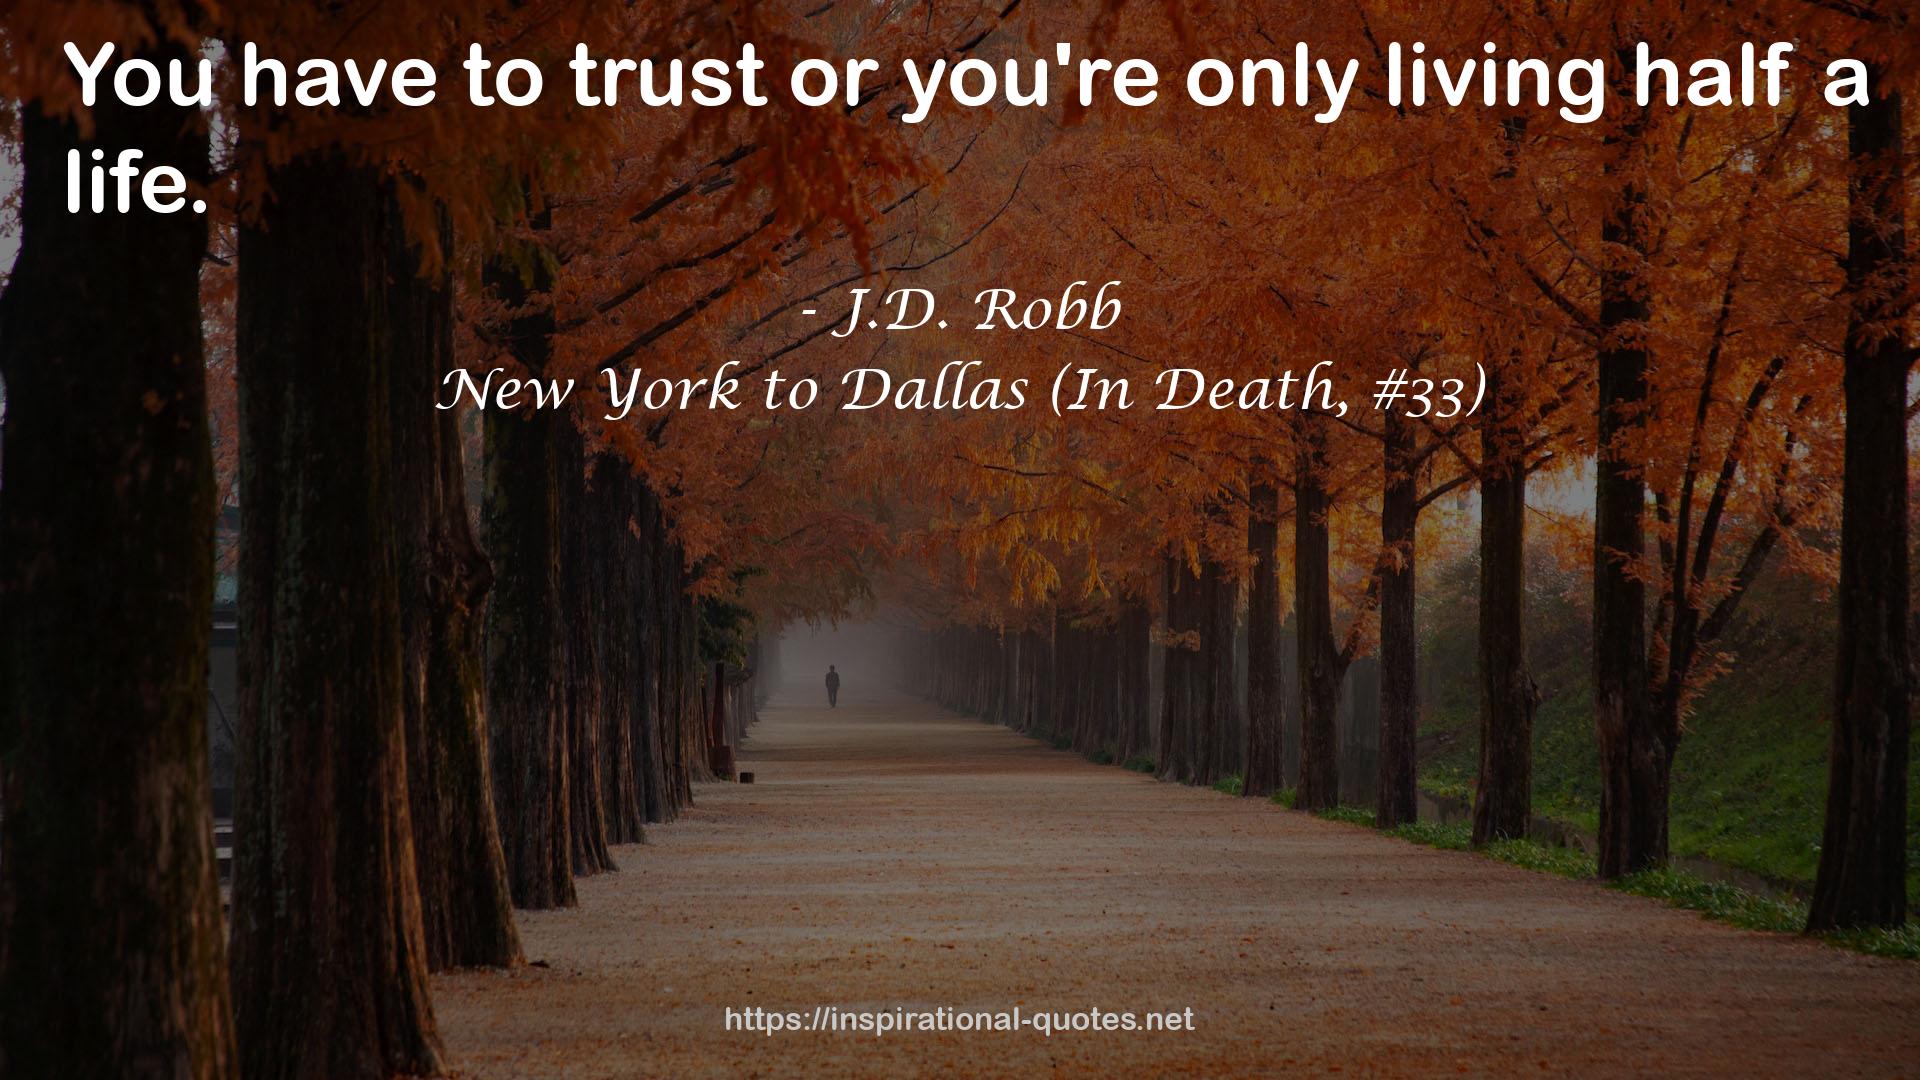 New York to Dallas (In Death, #33) QUOTES